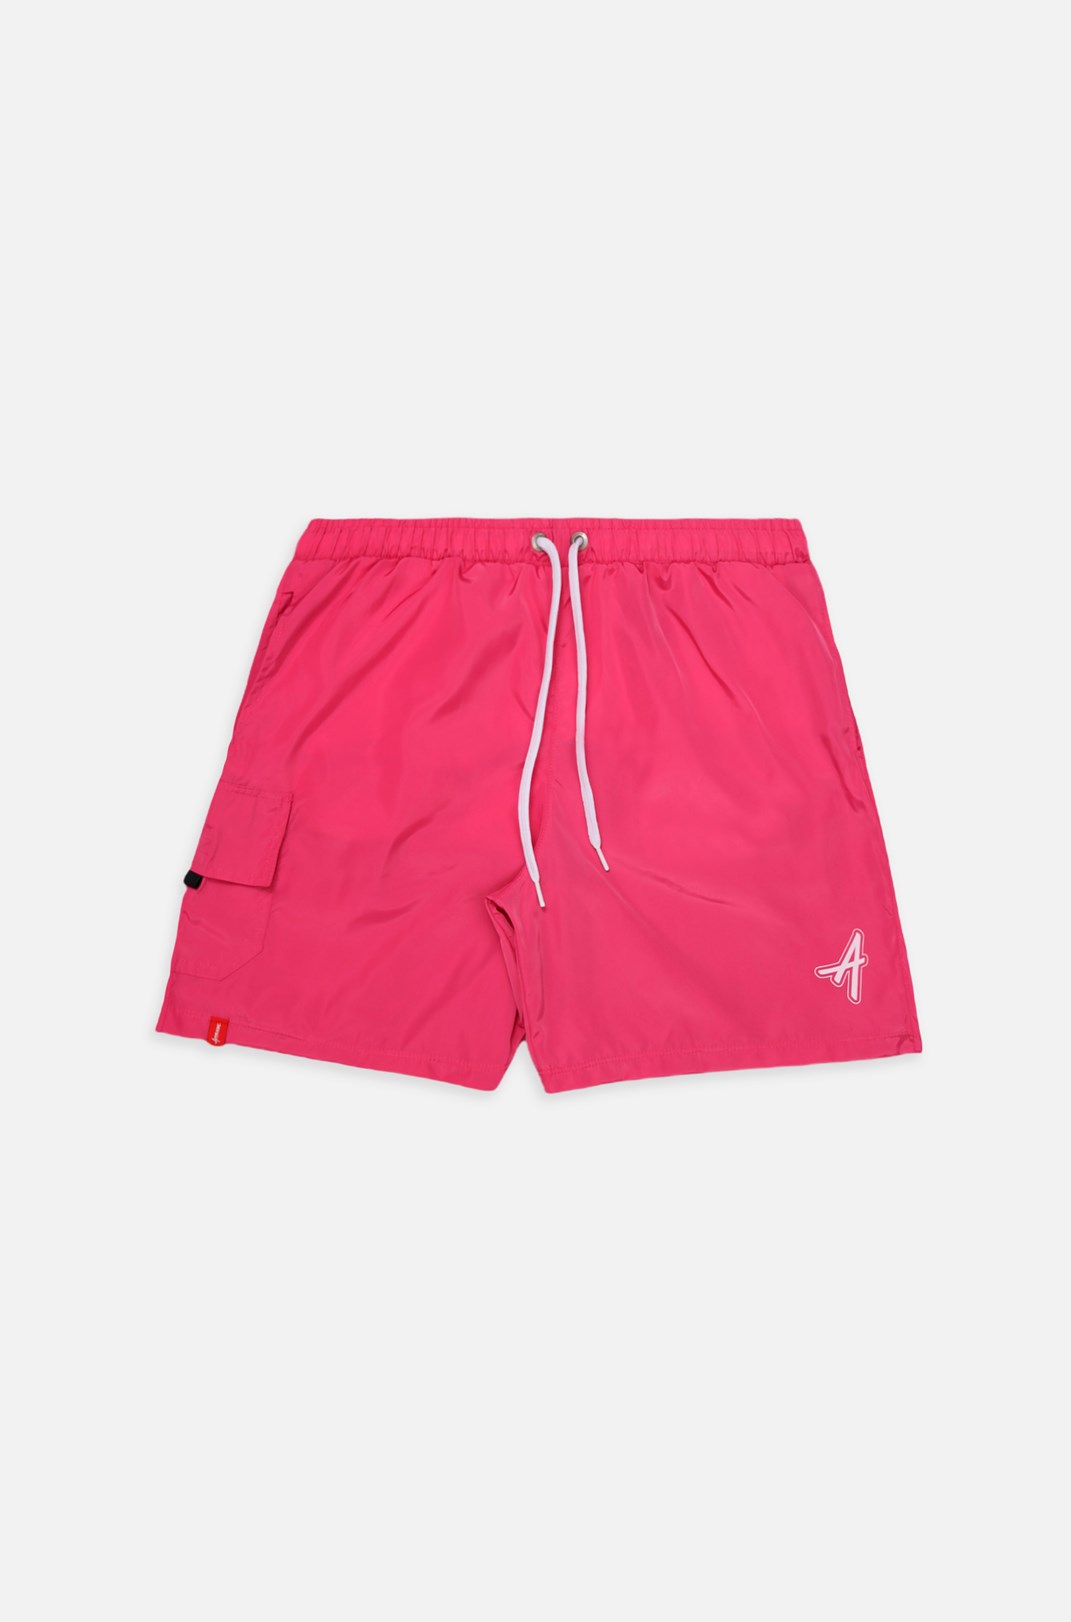 Shorts Approve Pink - Approve